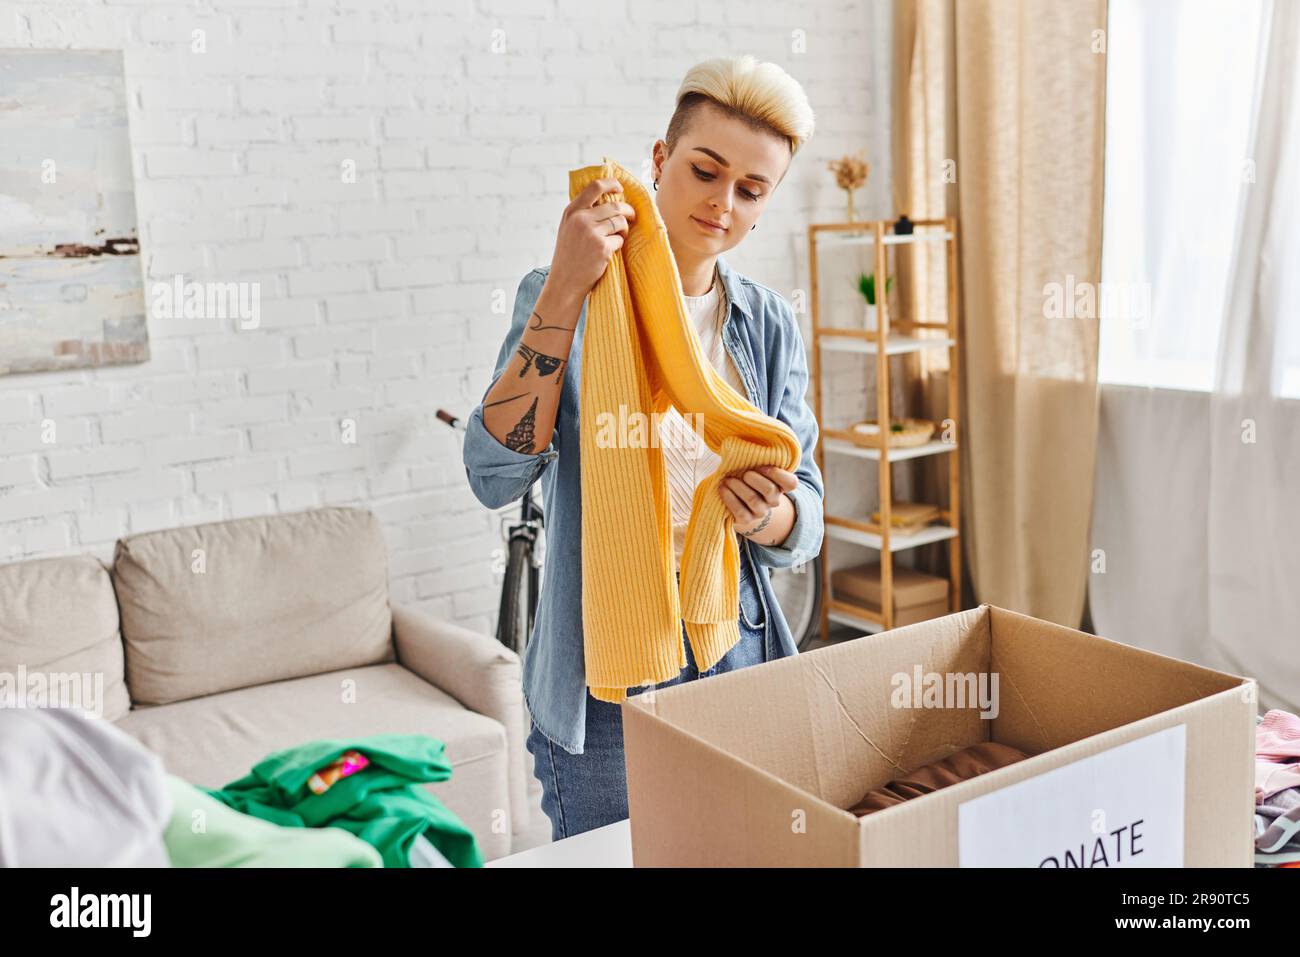 volunteering and charity, trendy and tattooed woman standing with yellow jumper near carton box while sorting clothing for donation at home, sustainab Stock Photo